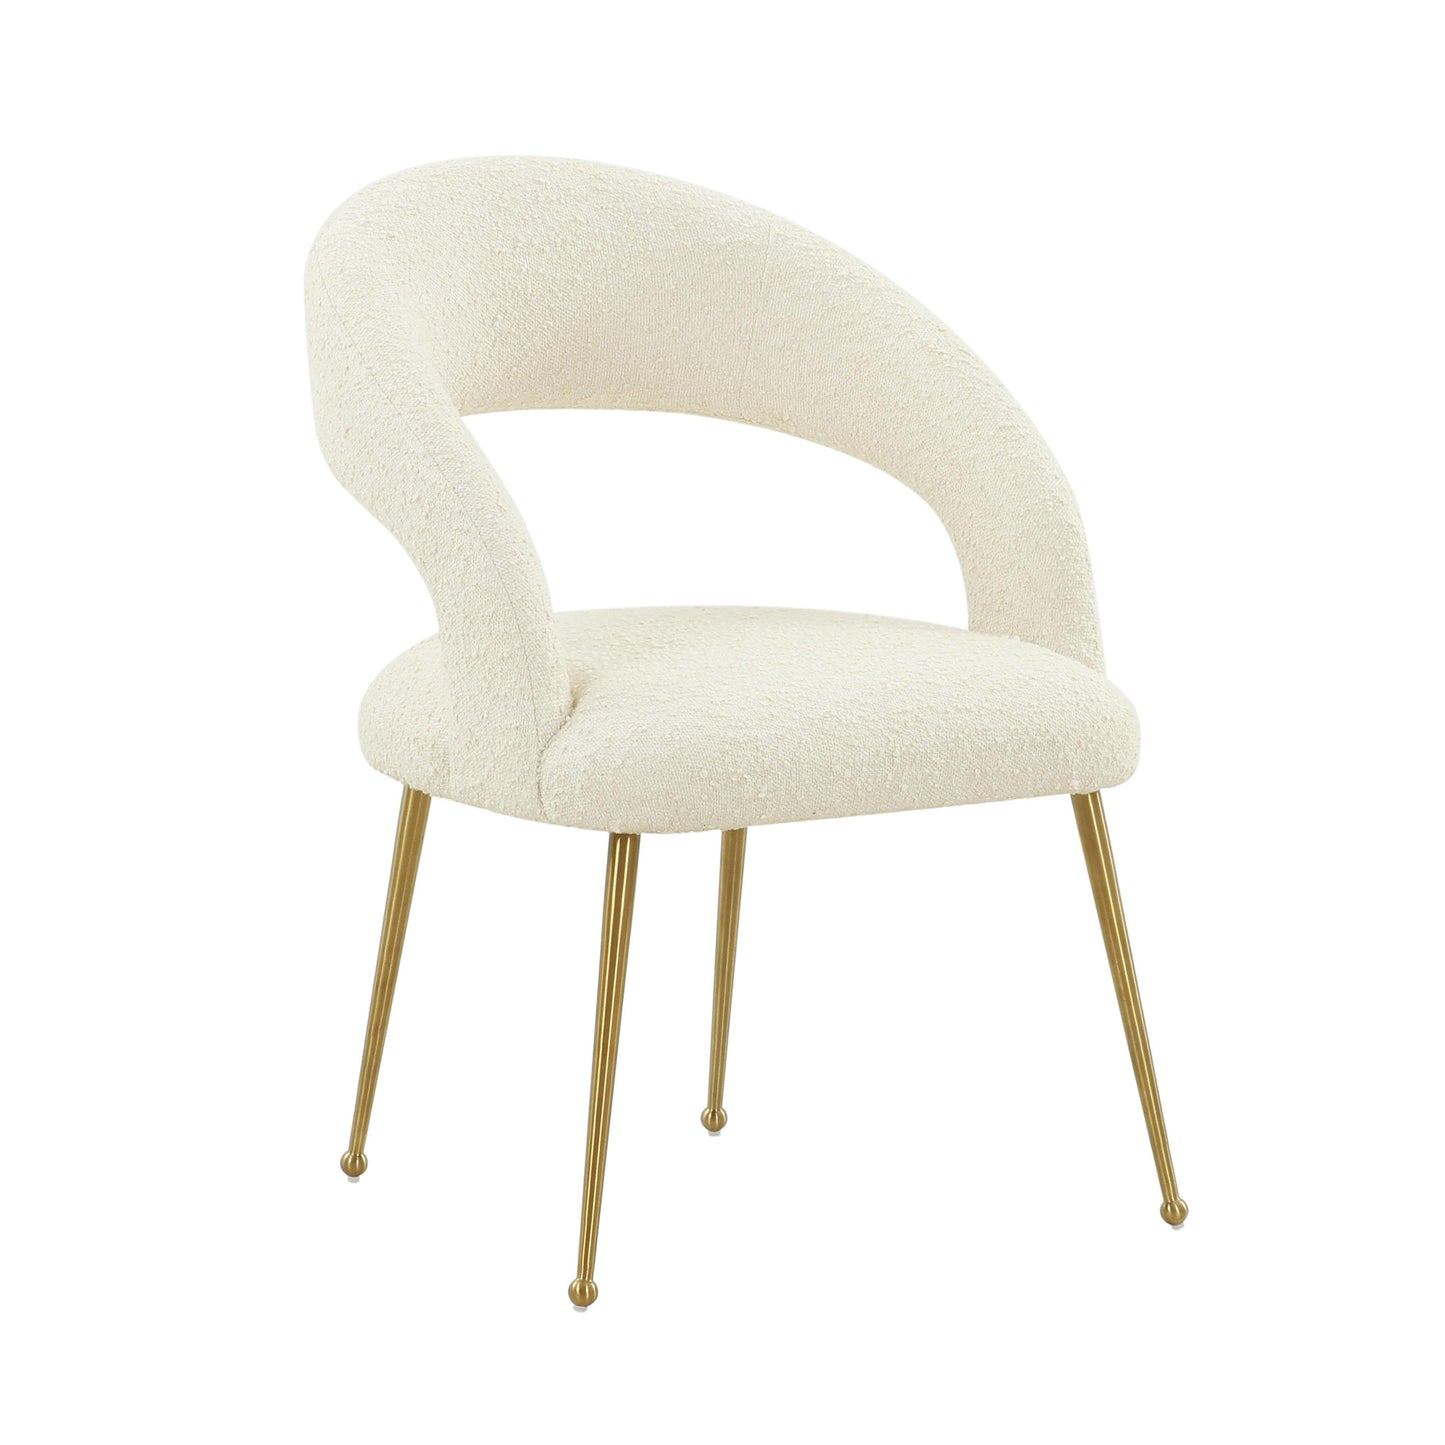 Tov Furniture Rocco Cream Boucle Dining chair